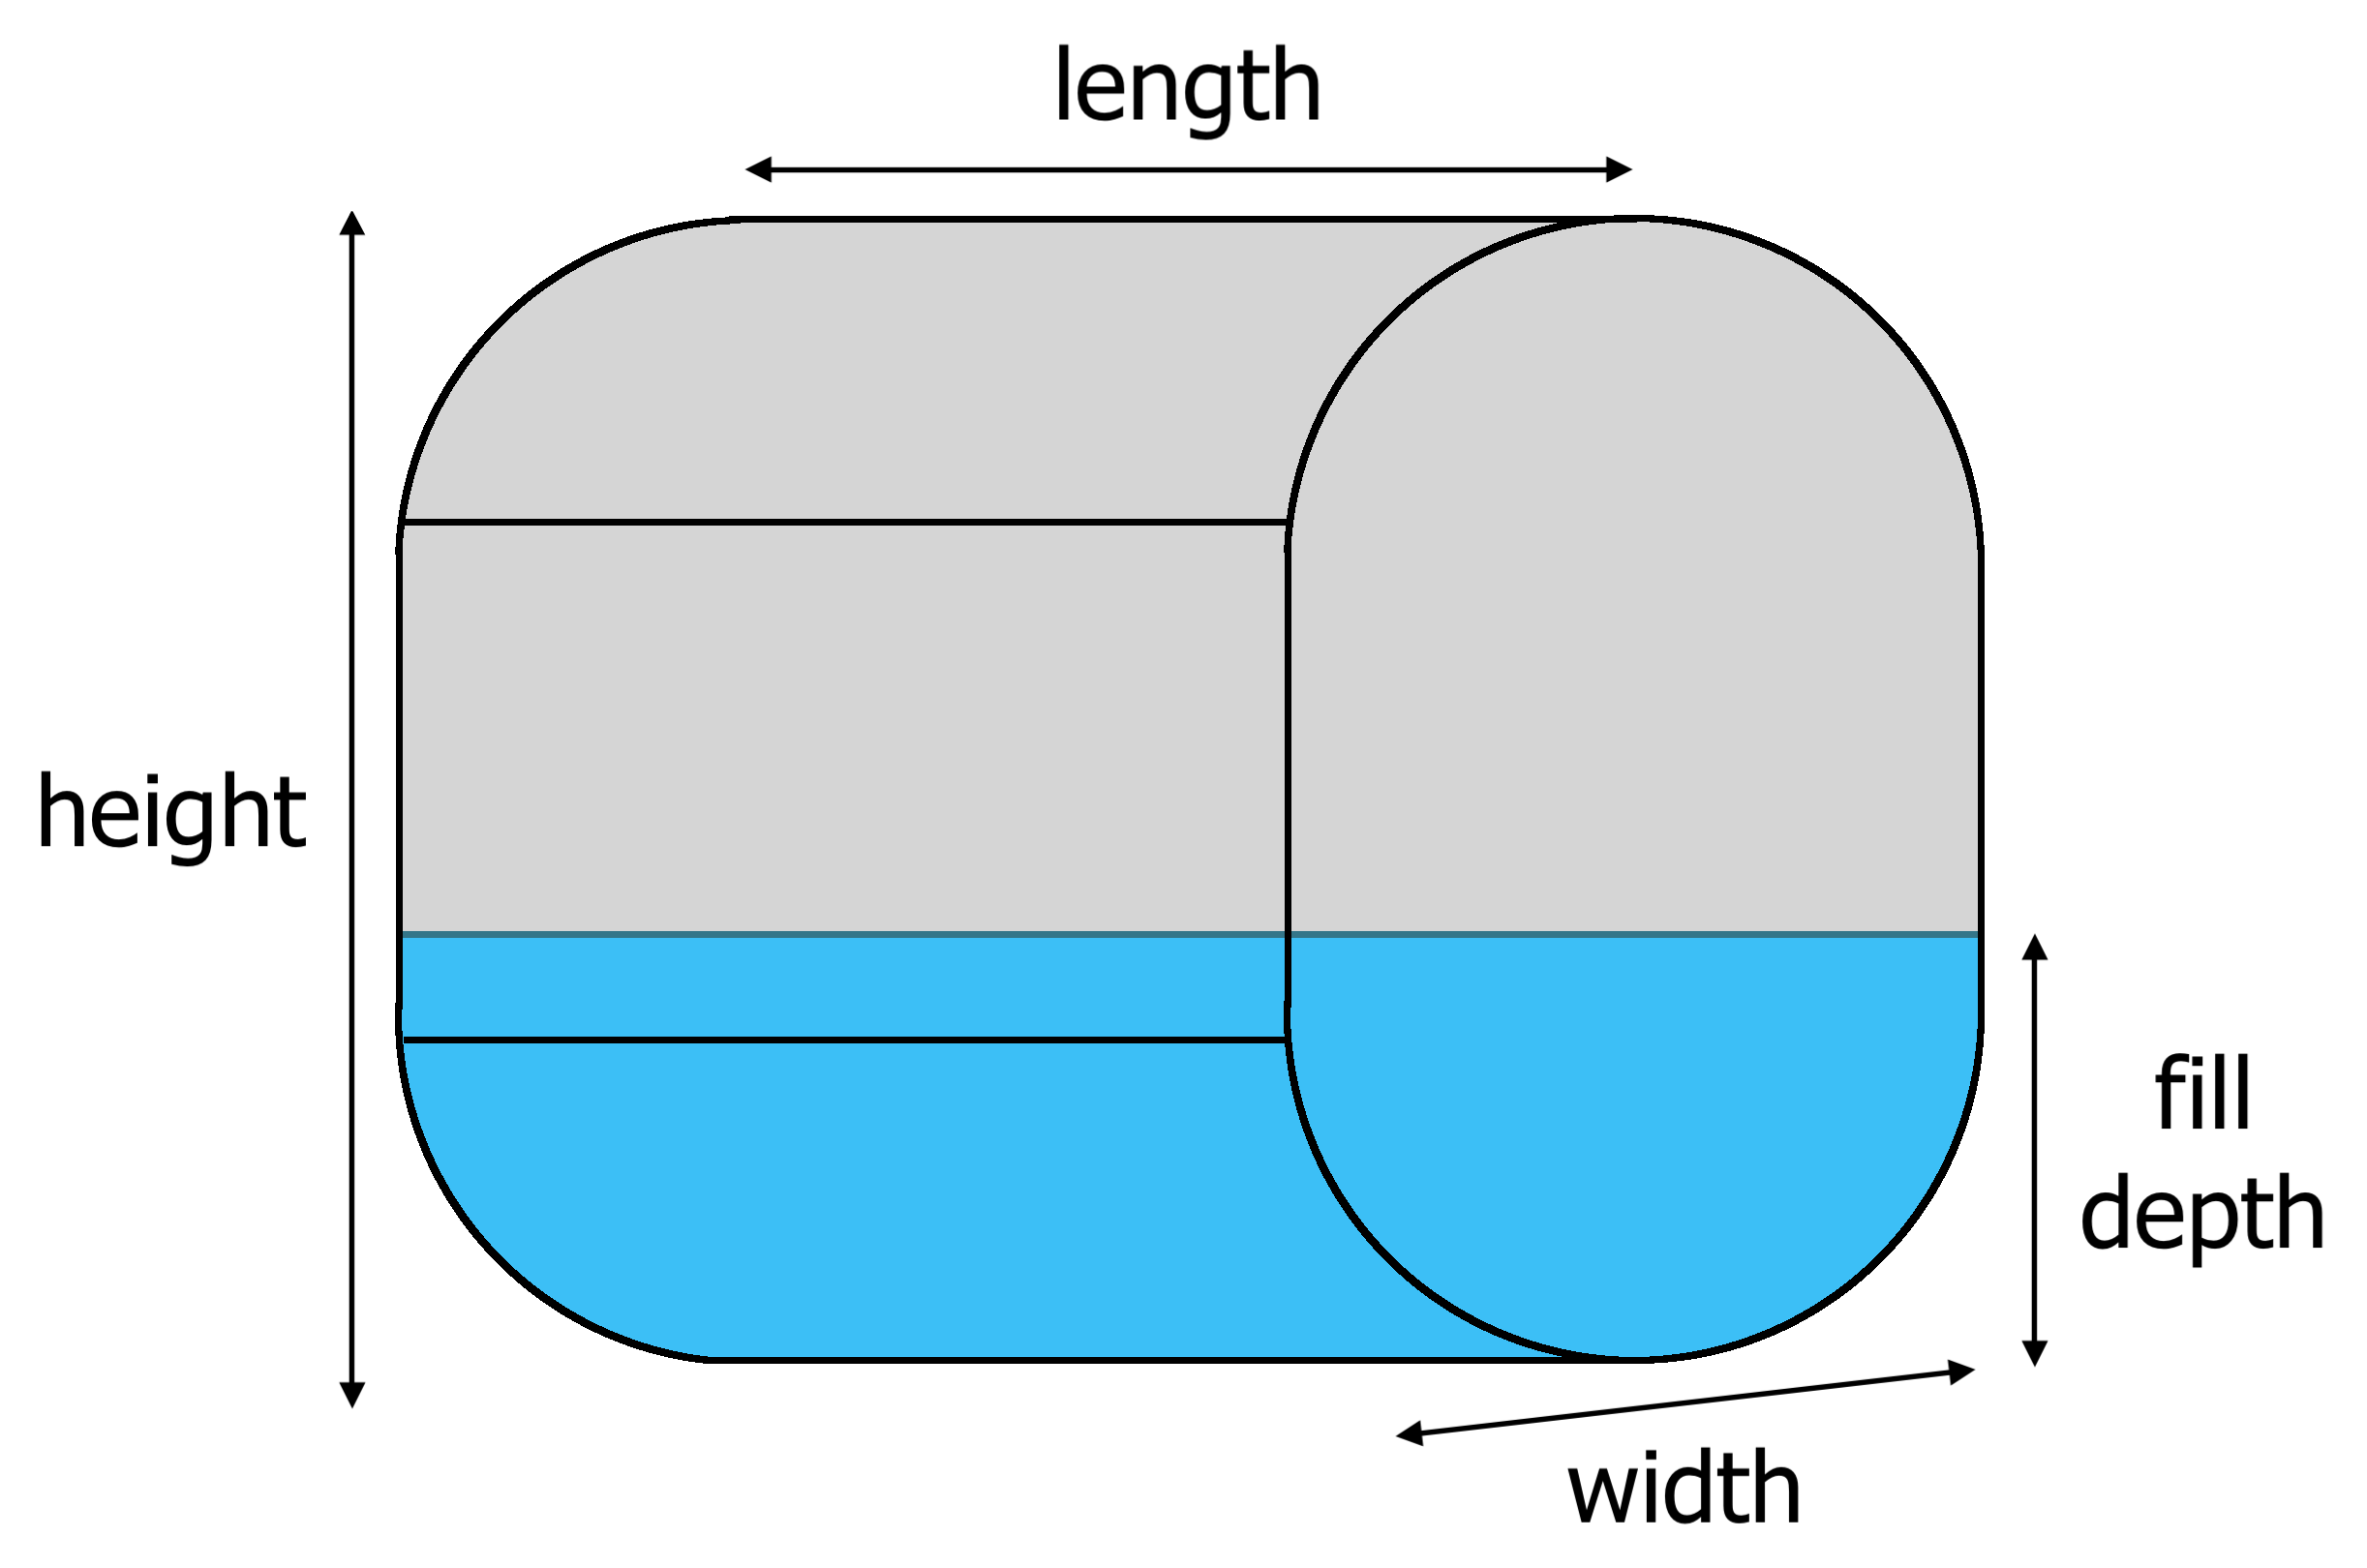 Diagram of an oval tank showing the length, width, and height dimensions